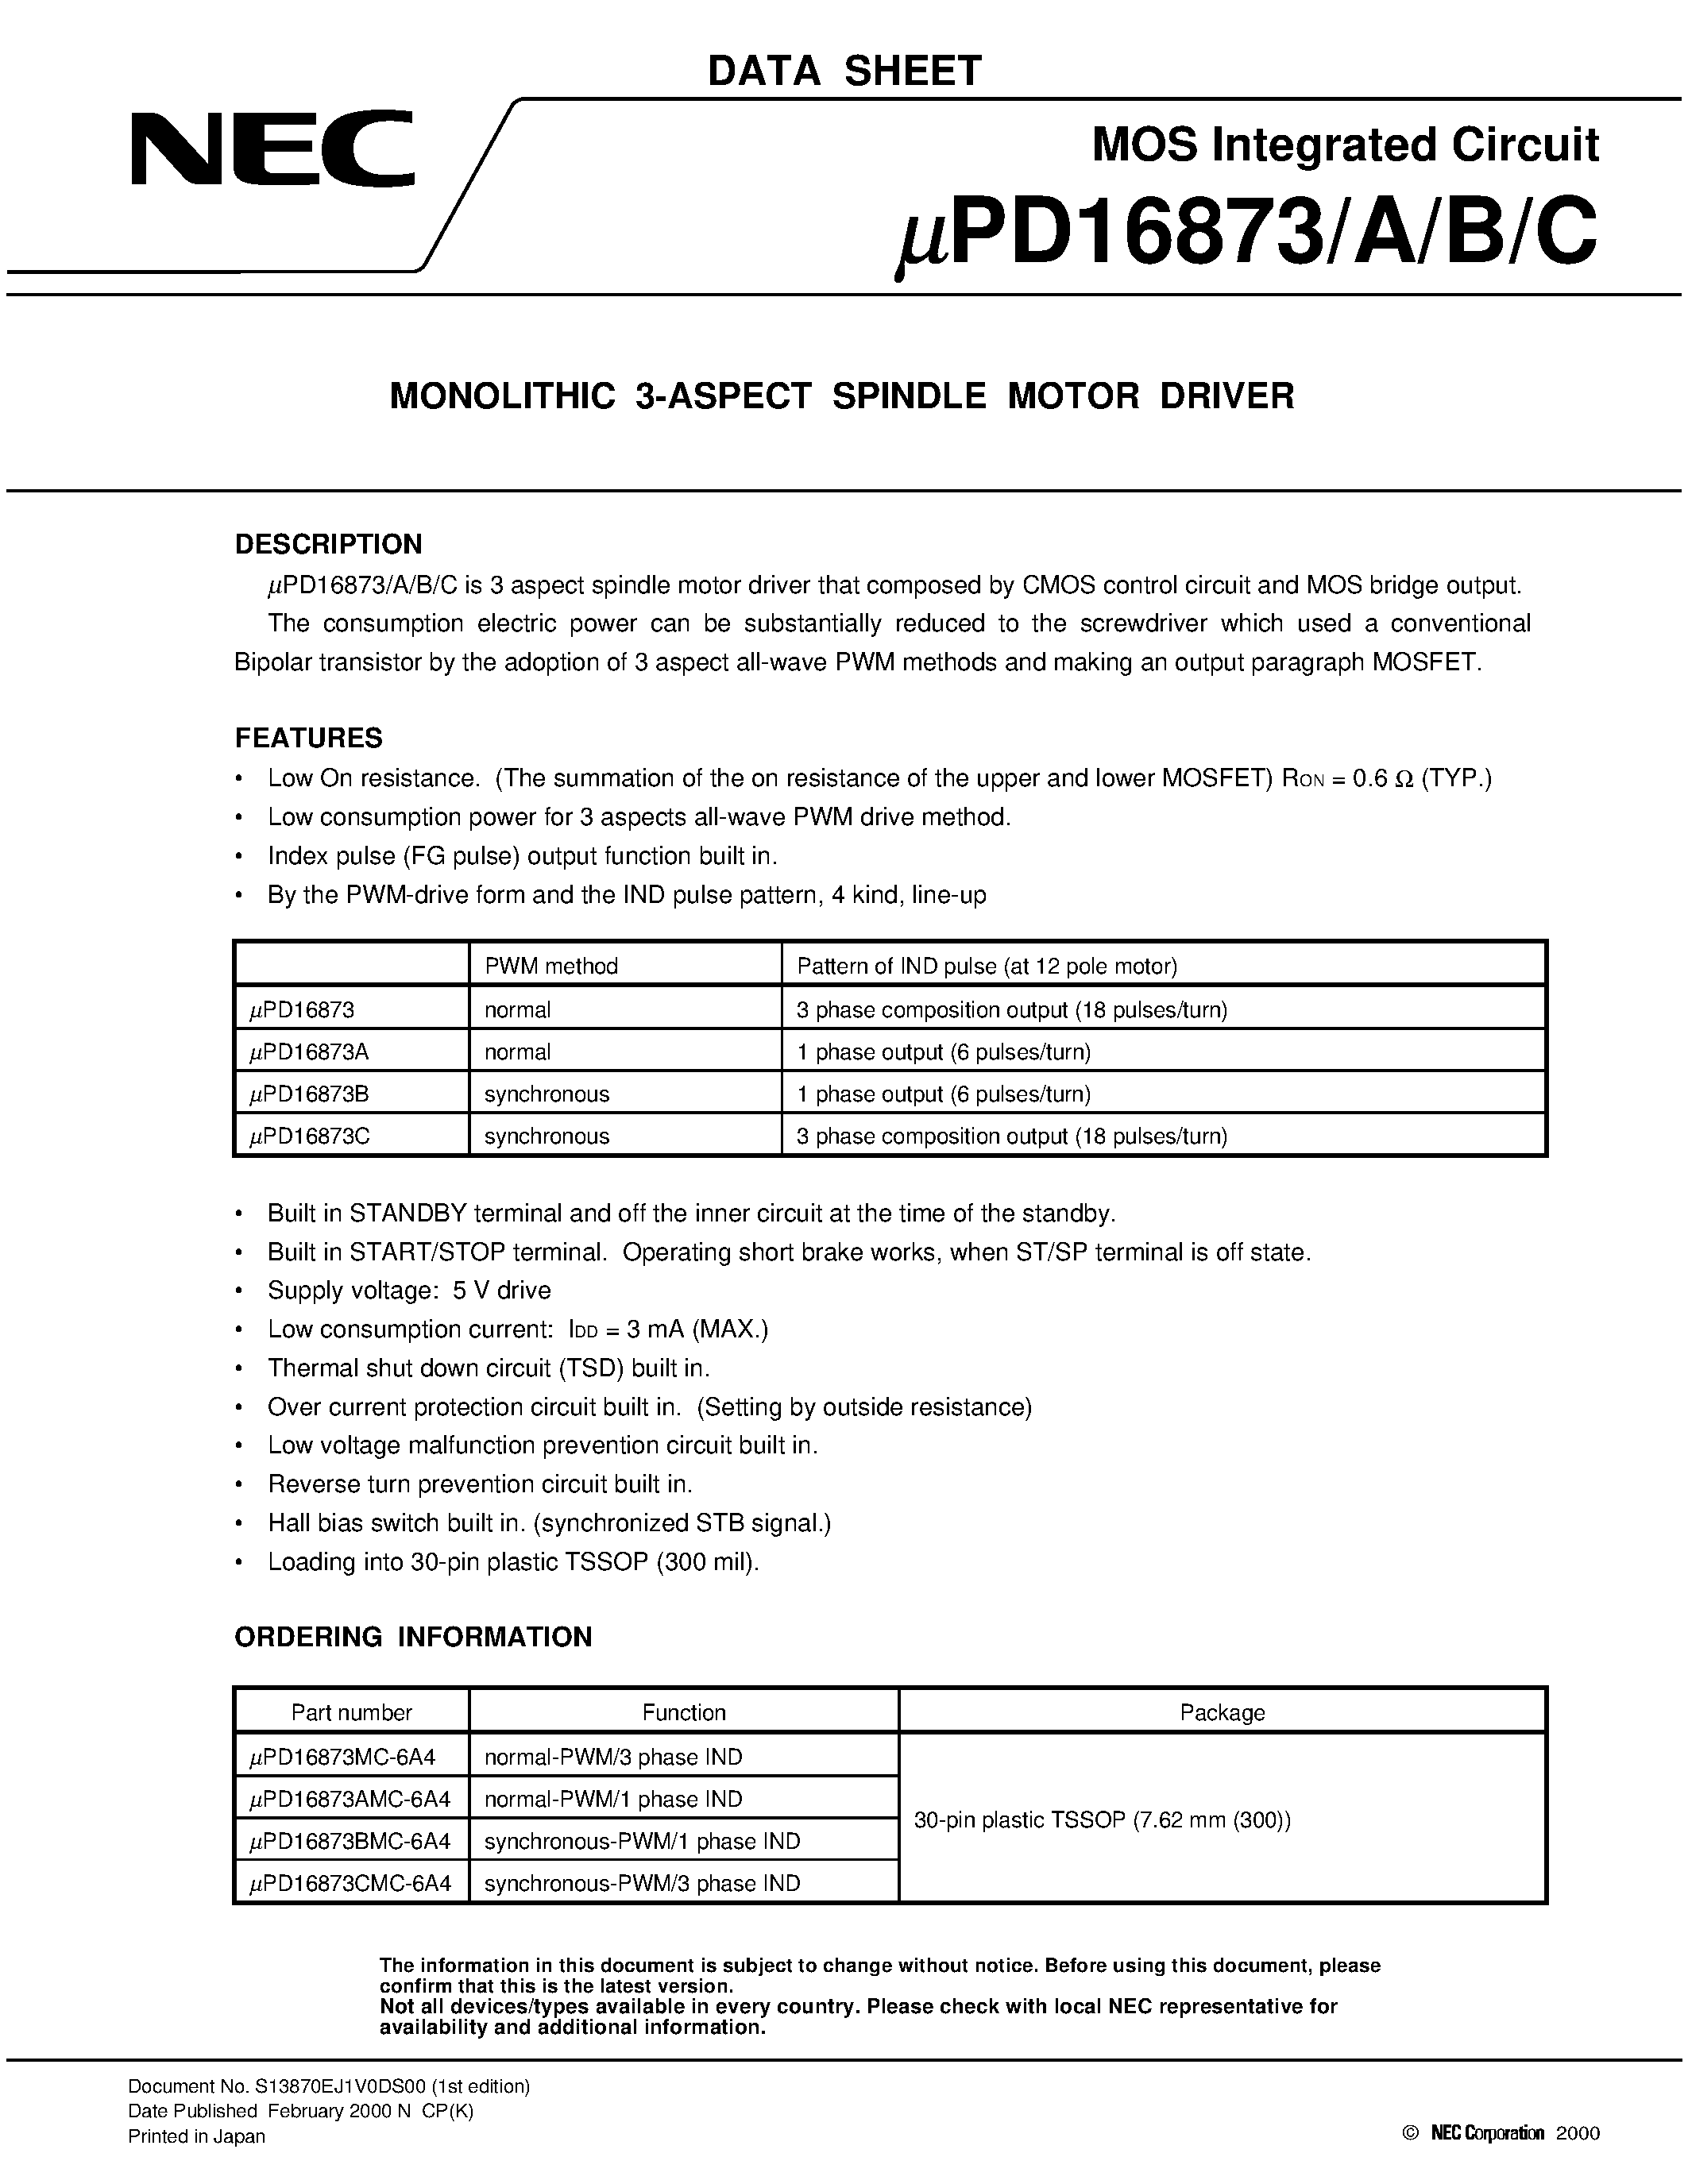 Datasheet UPD16873B - MONOLITHIC 3-ASPECT SPINDLE MOTOR DRIVER page 1